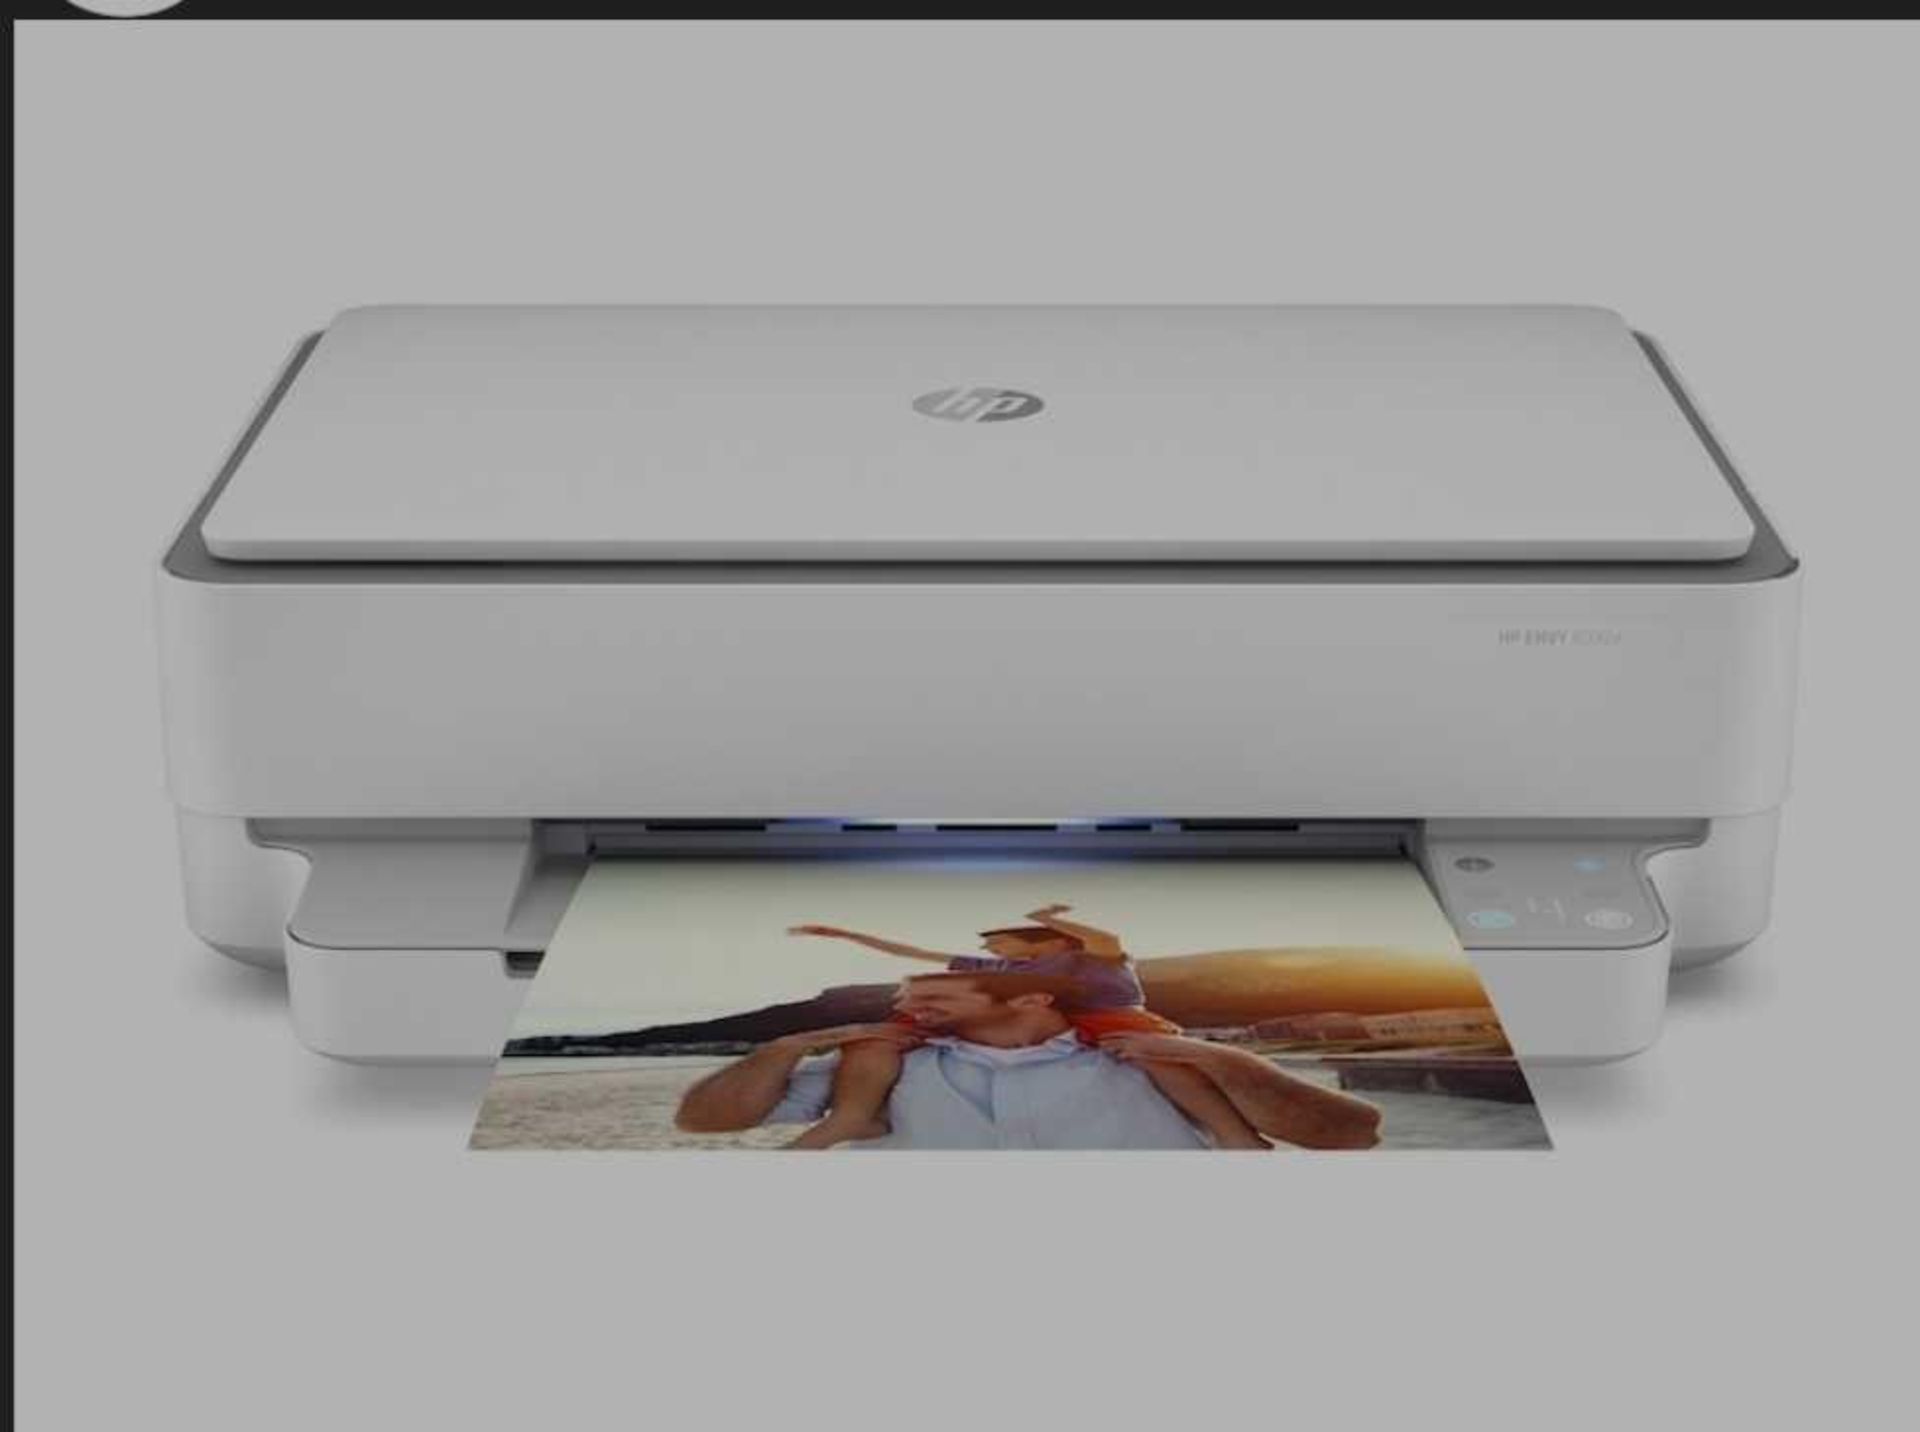 RRP £80 Boxed Hp Envy 6030E All In One Printer - Image 2 of 2